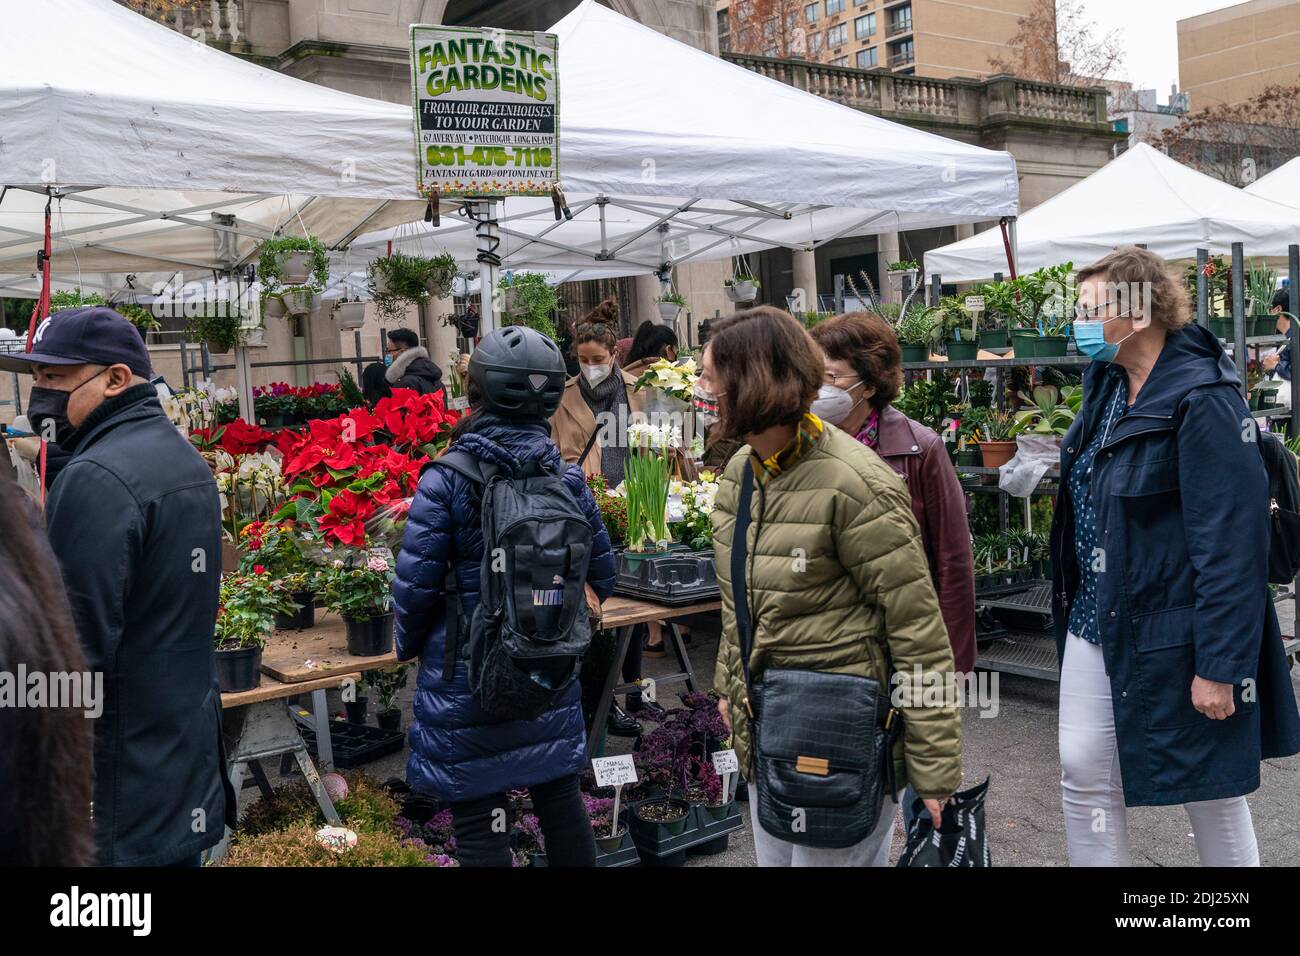 New York, NY - December 12, 2020: People shopping during Holiday season at Union Square farmers market Stock Photo